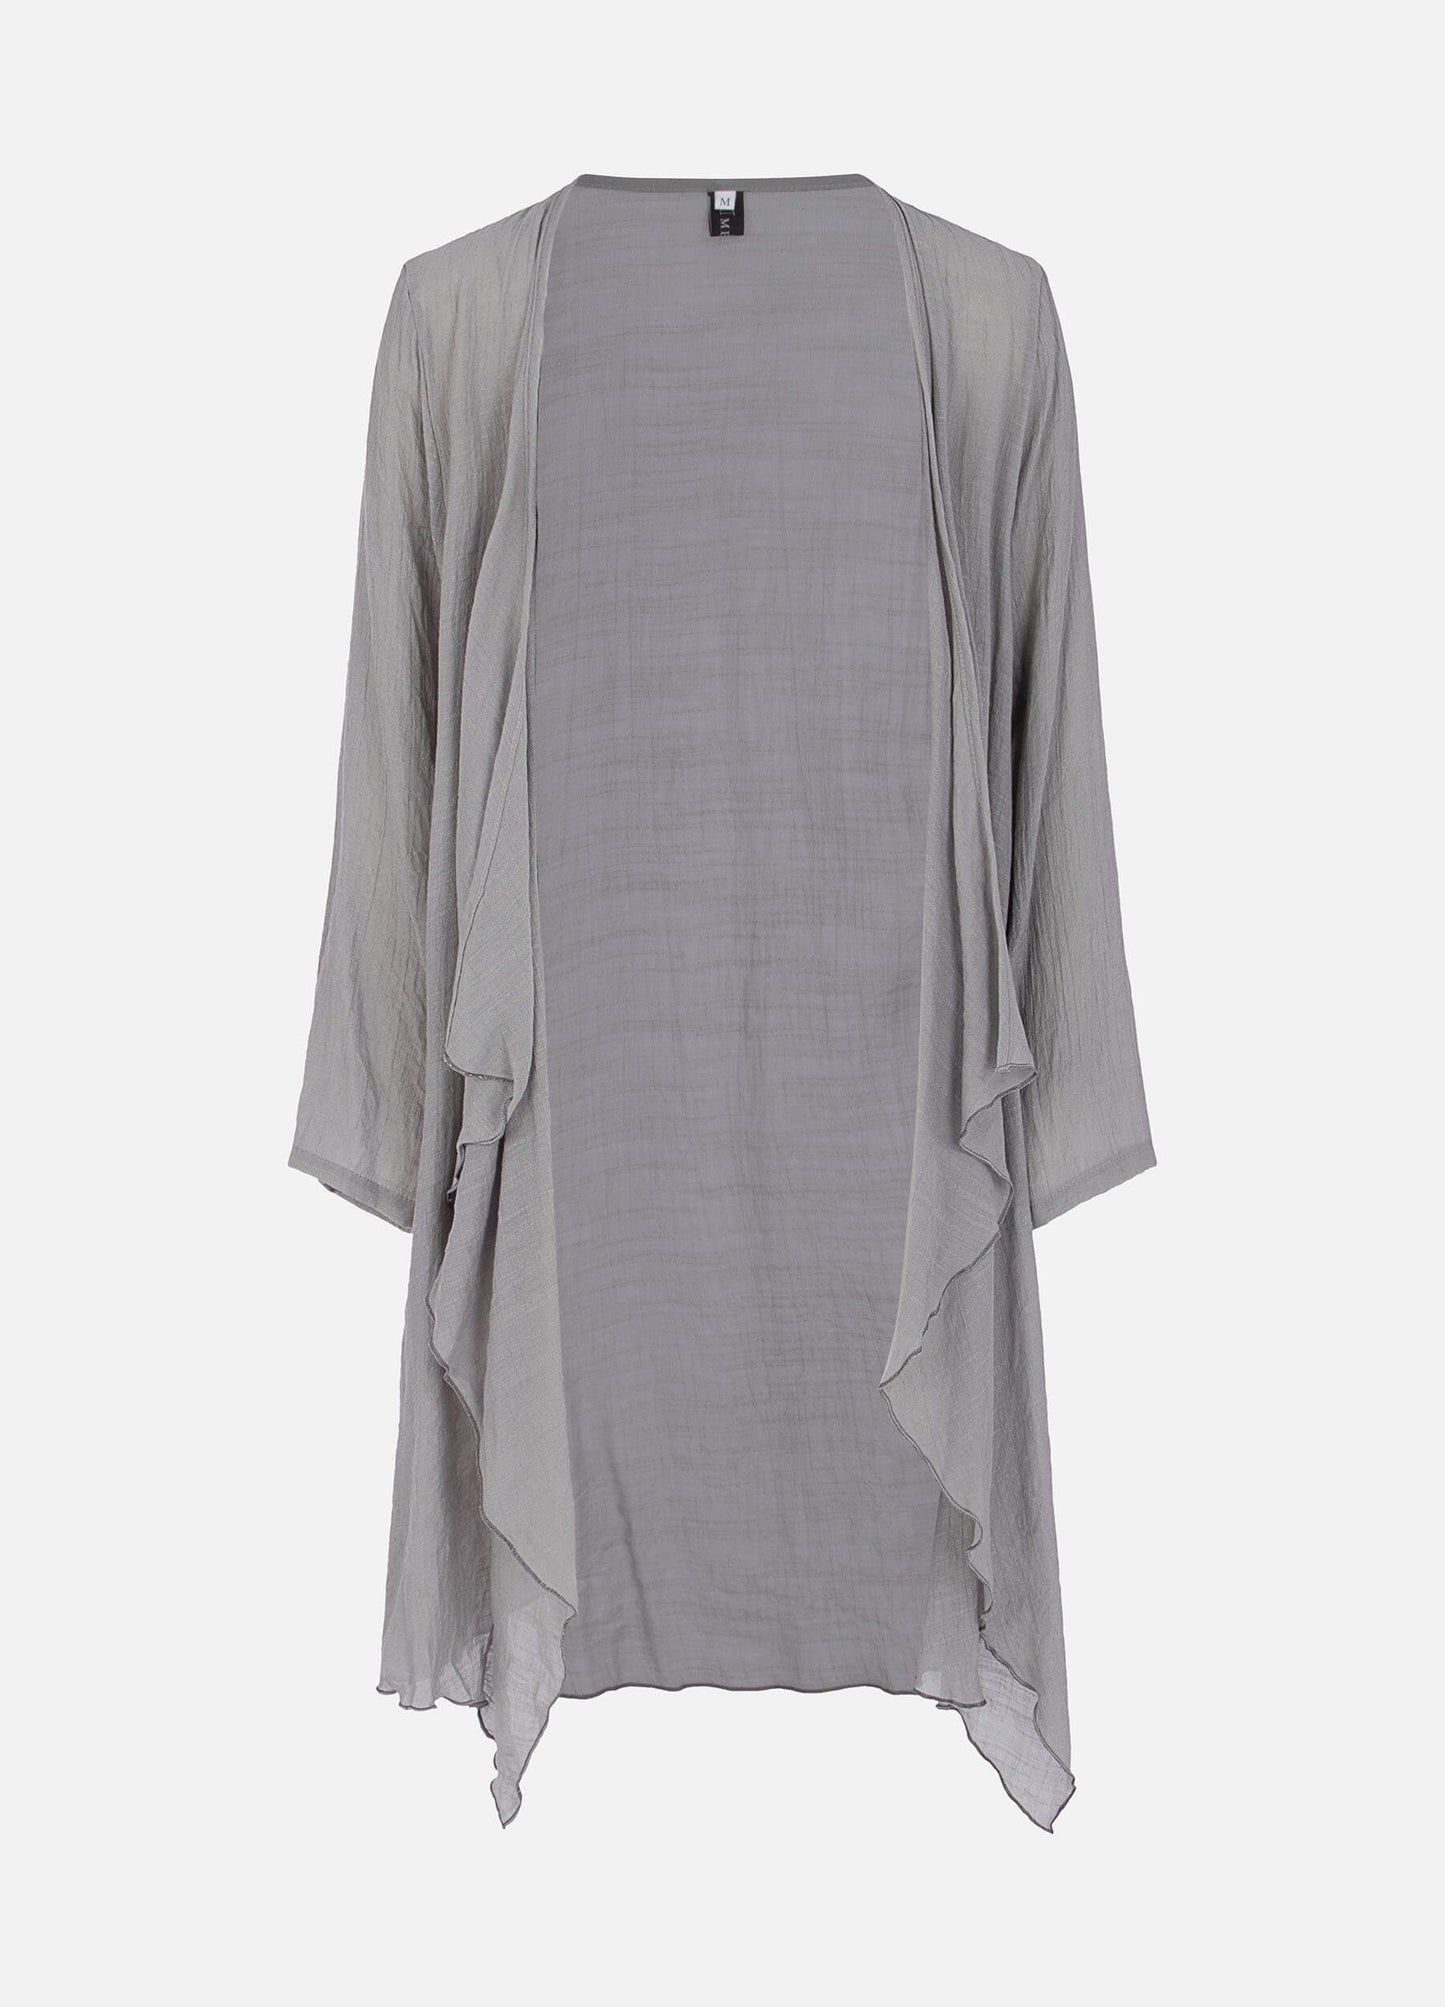 MECALA Women's Solid Linen Grey Cardigan Dress with Wooden Fish Necklace